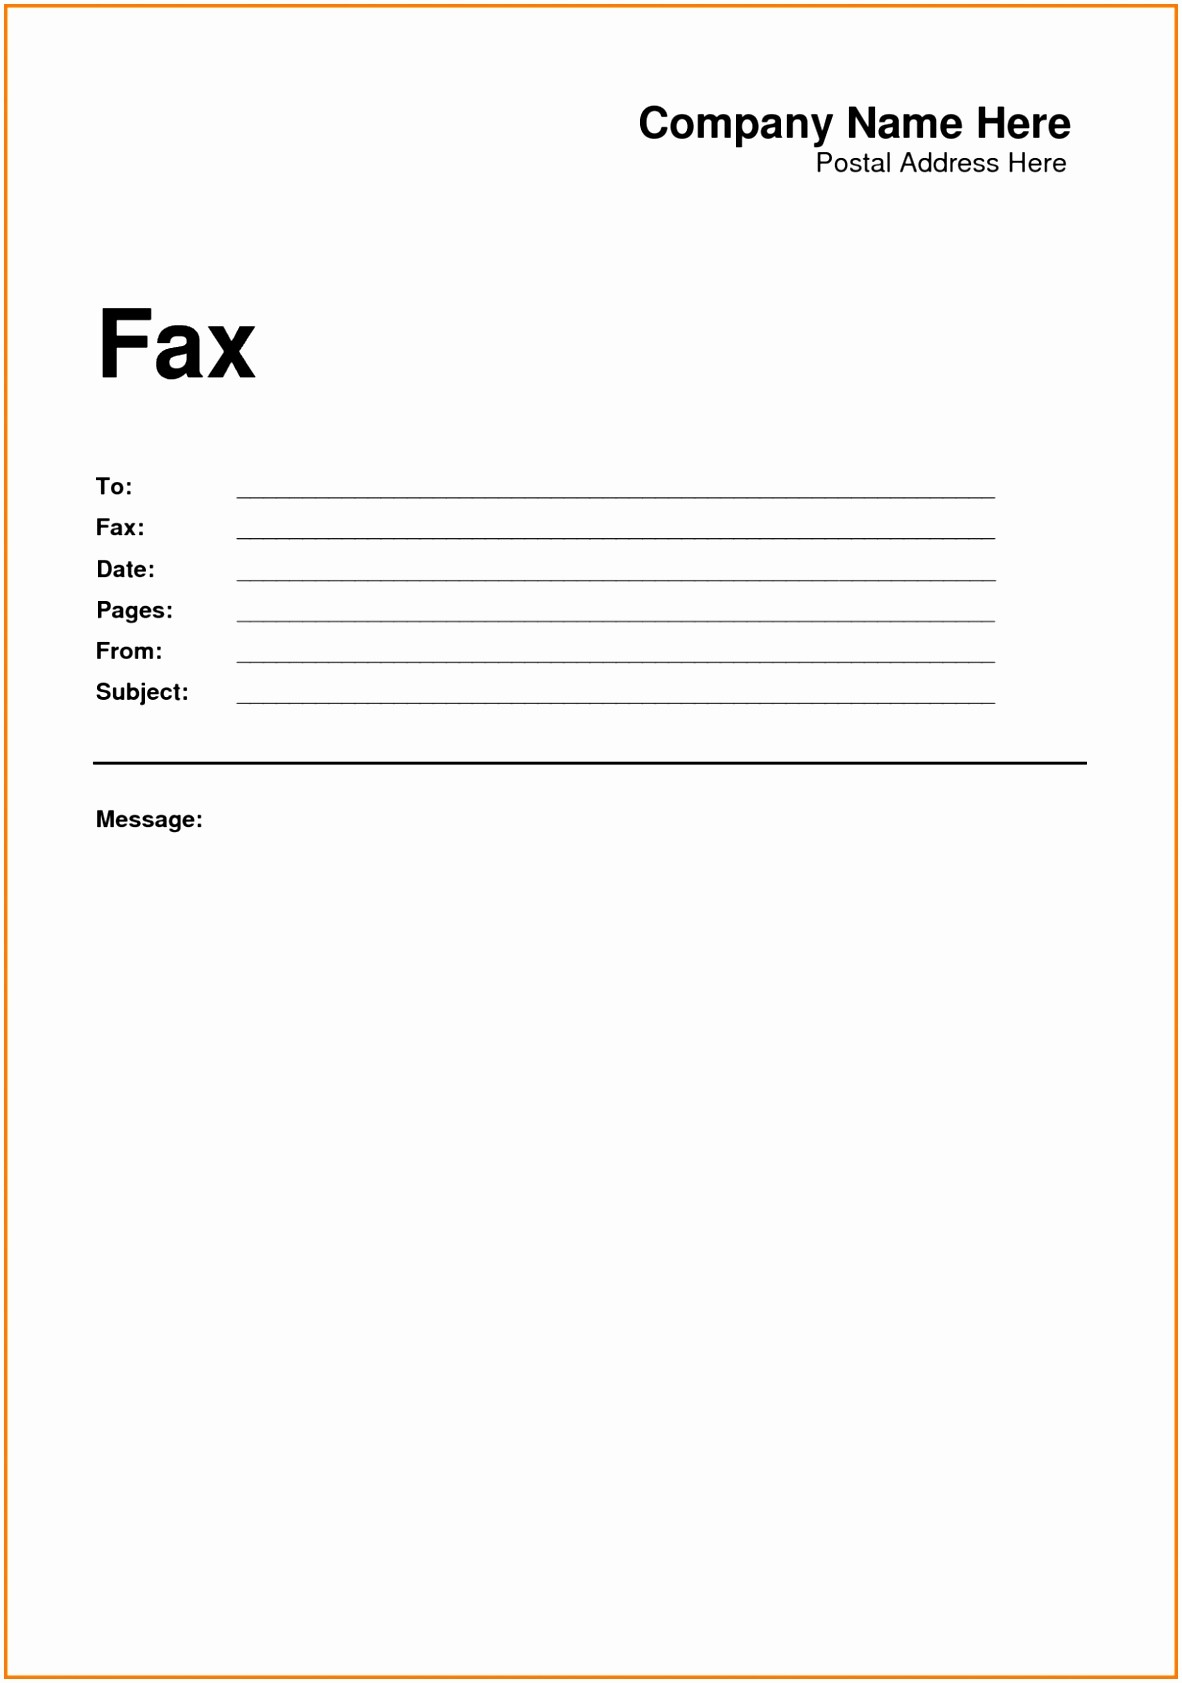 Word Fax Cover Sheet Templates Fresh Good Covering Letter Example Uk Gseokbinder Design Fax